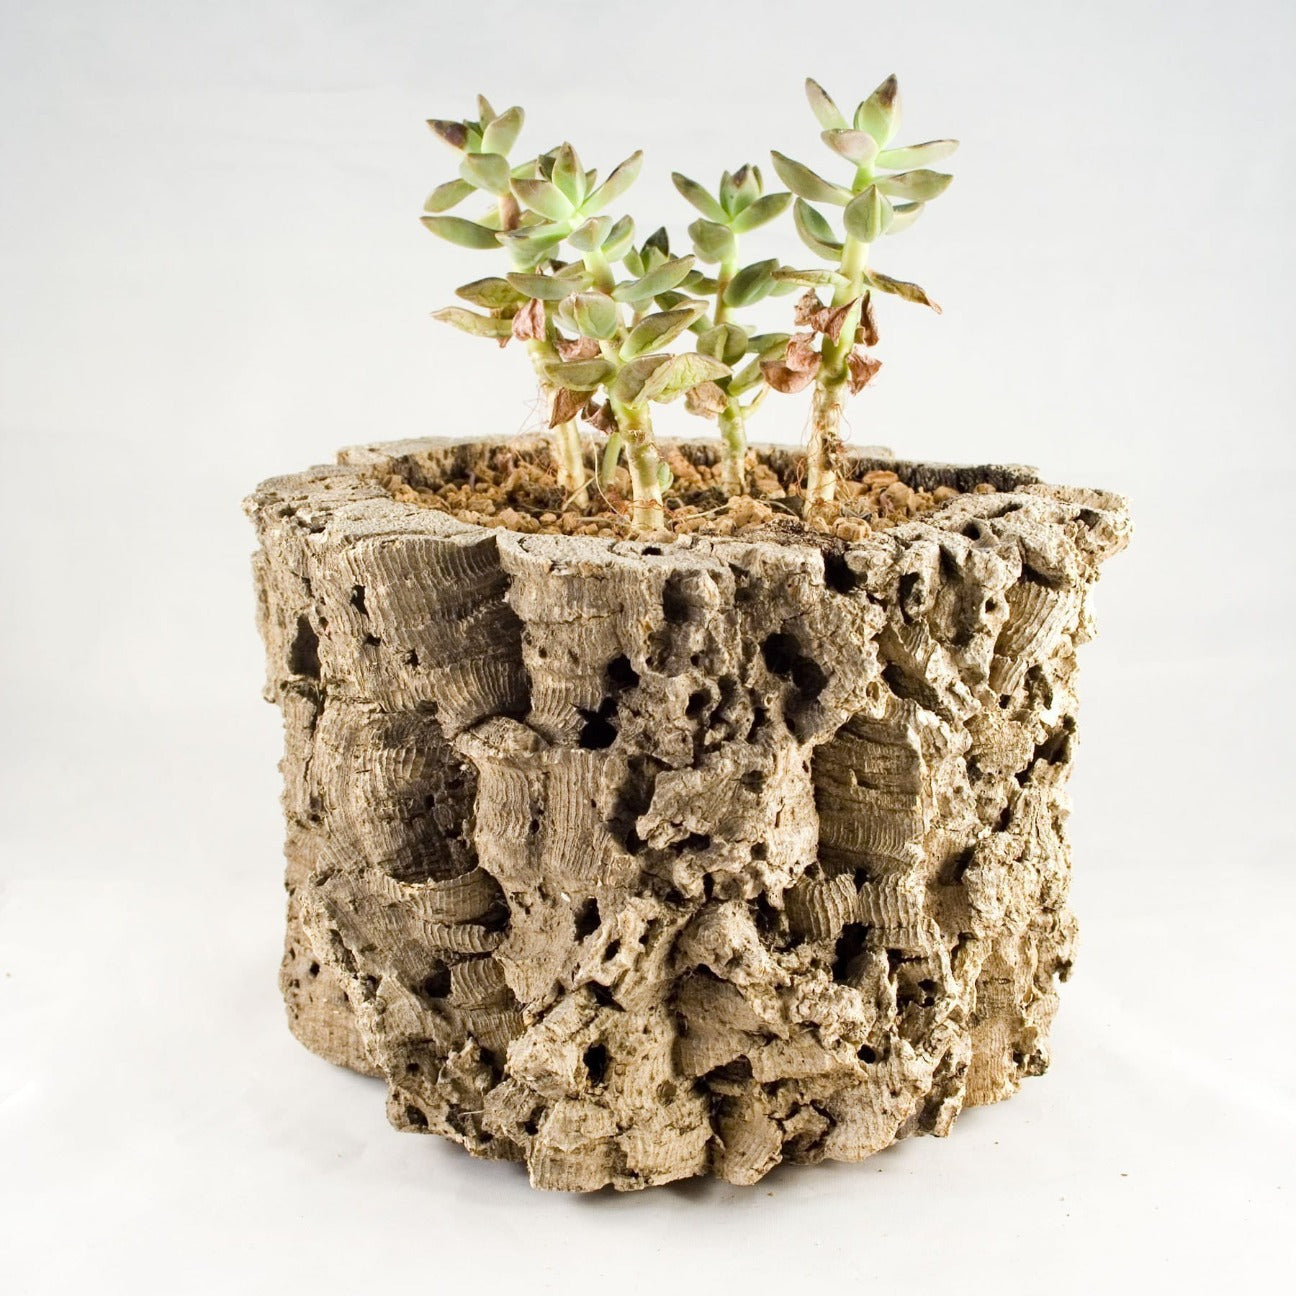 A natural cork planter made of rough virgin cork bark with a succulent in the pot.